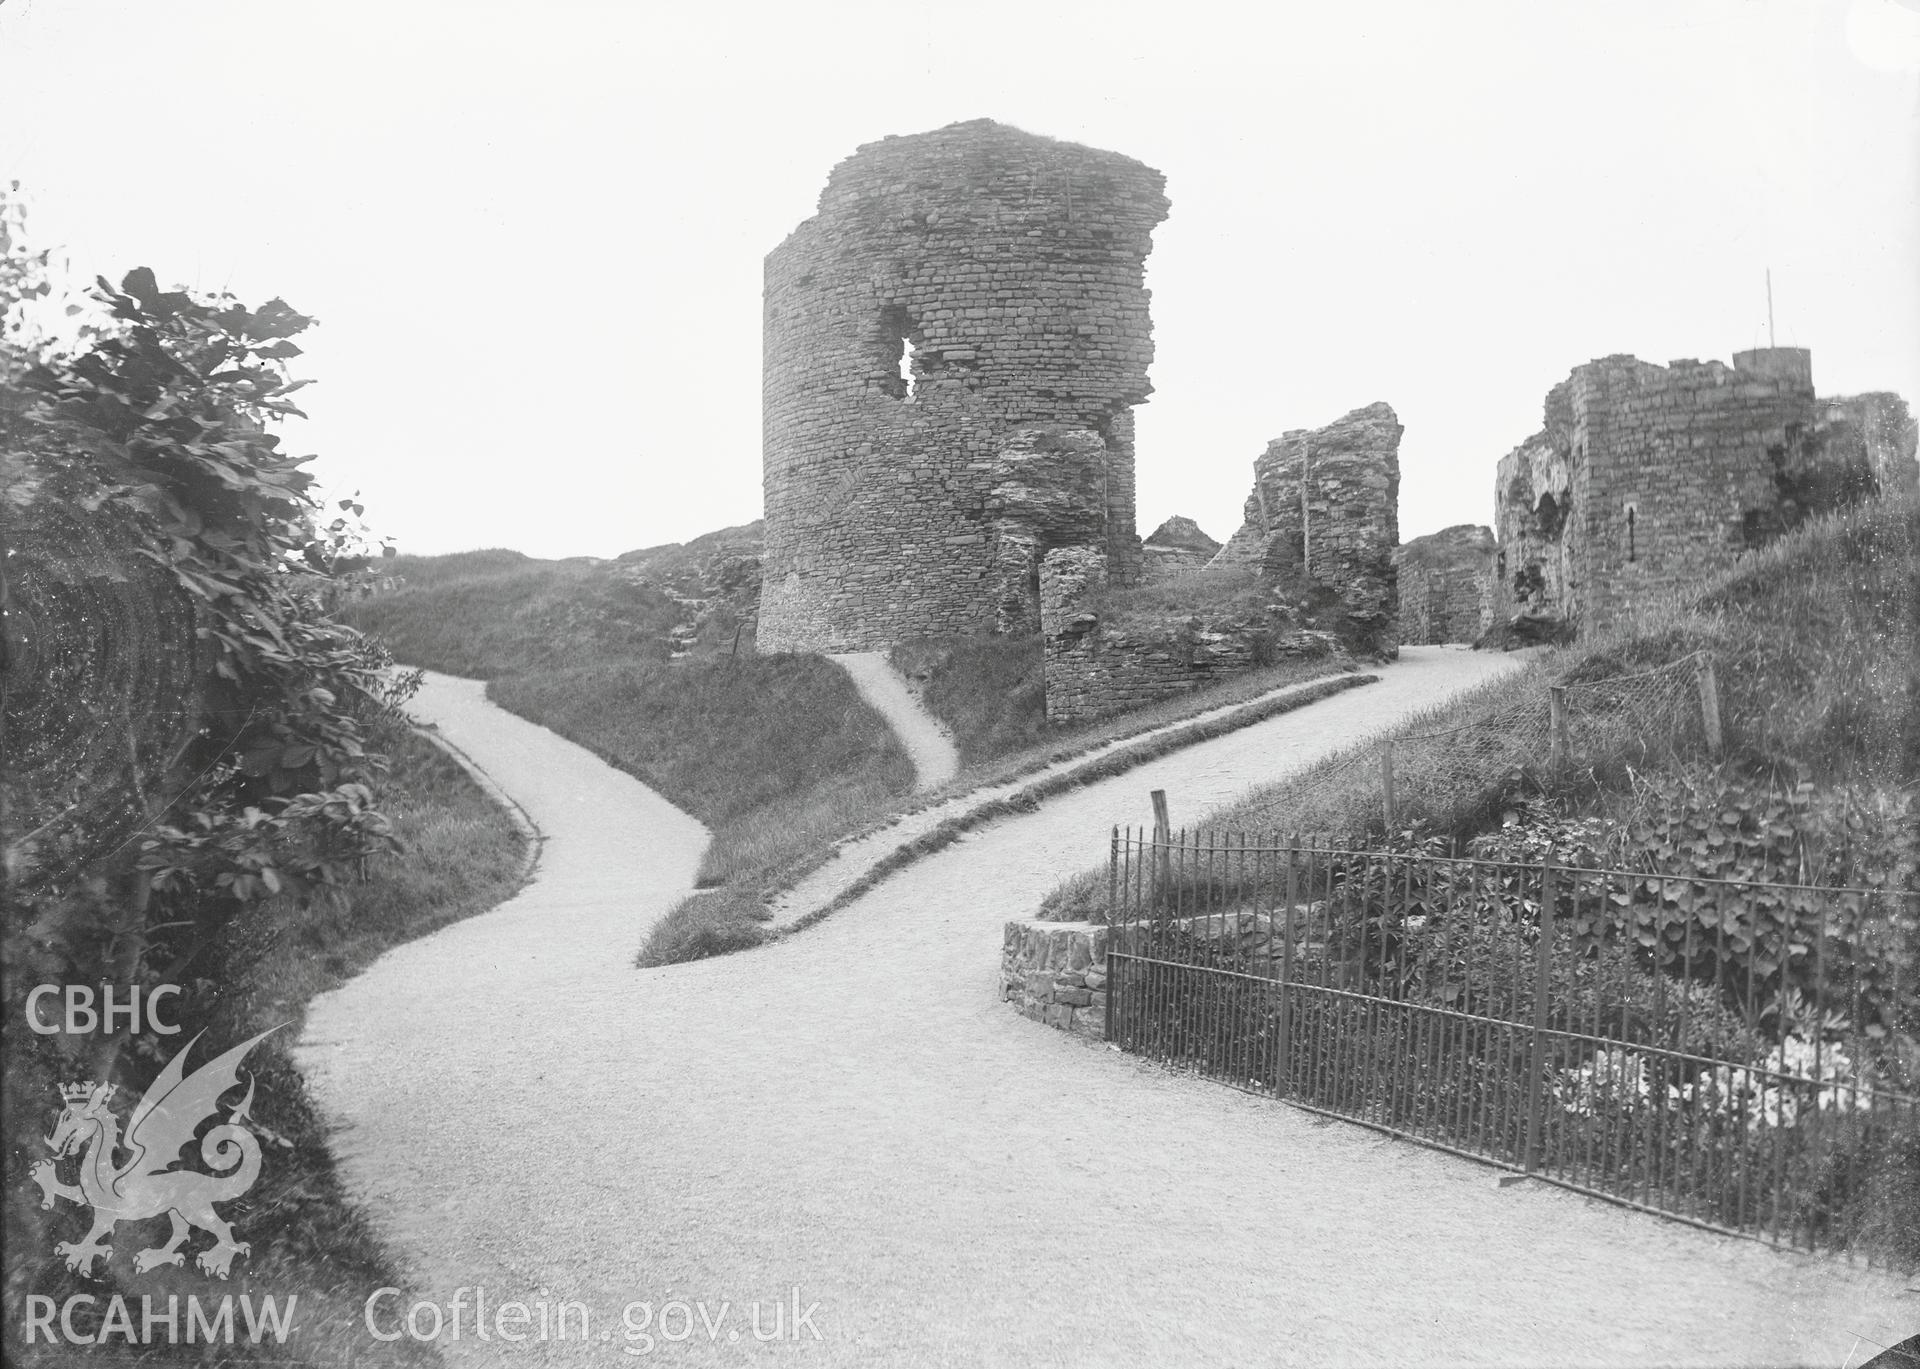 Black and white image dating from c.1910 showing Aberystwyth Castle,  taken by Emile T. Evans.